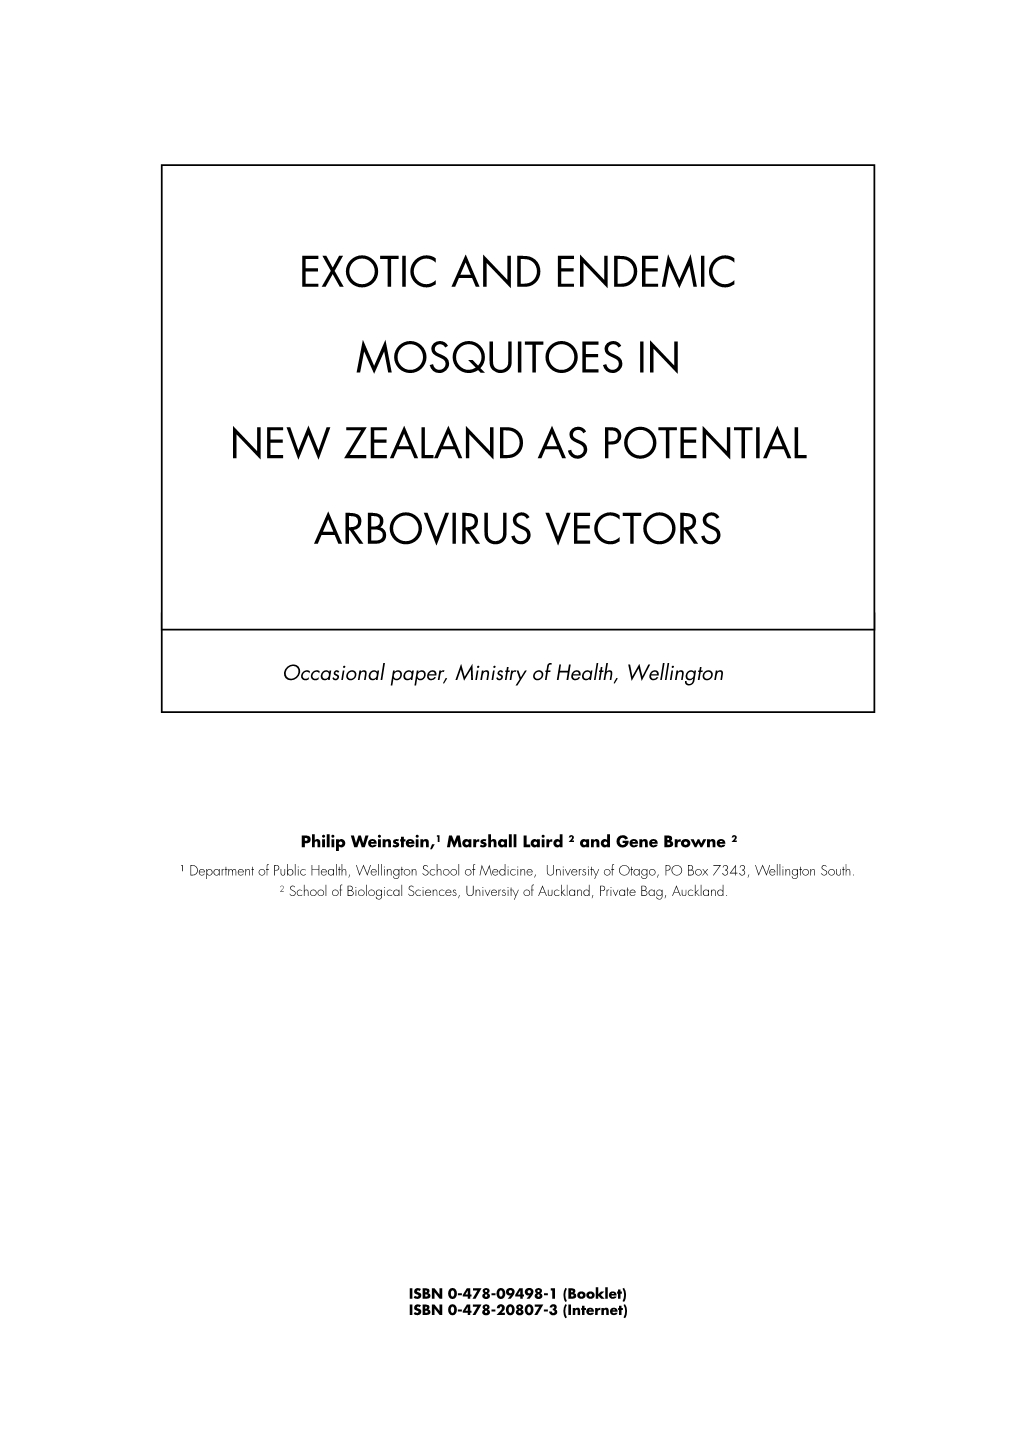 Exotic and Endemic Mosquitoes in New Zealand